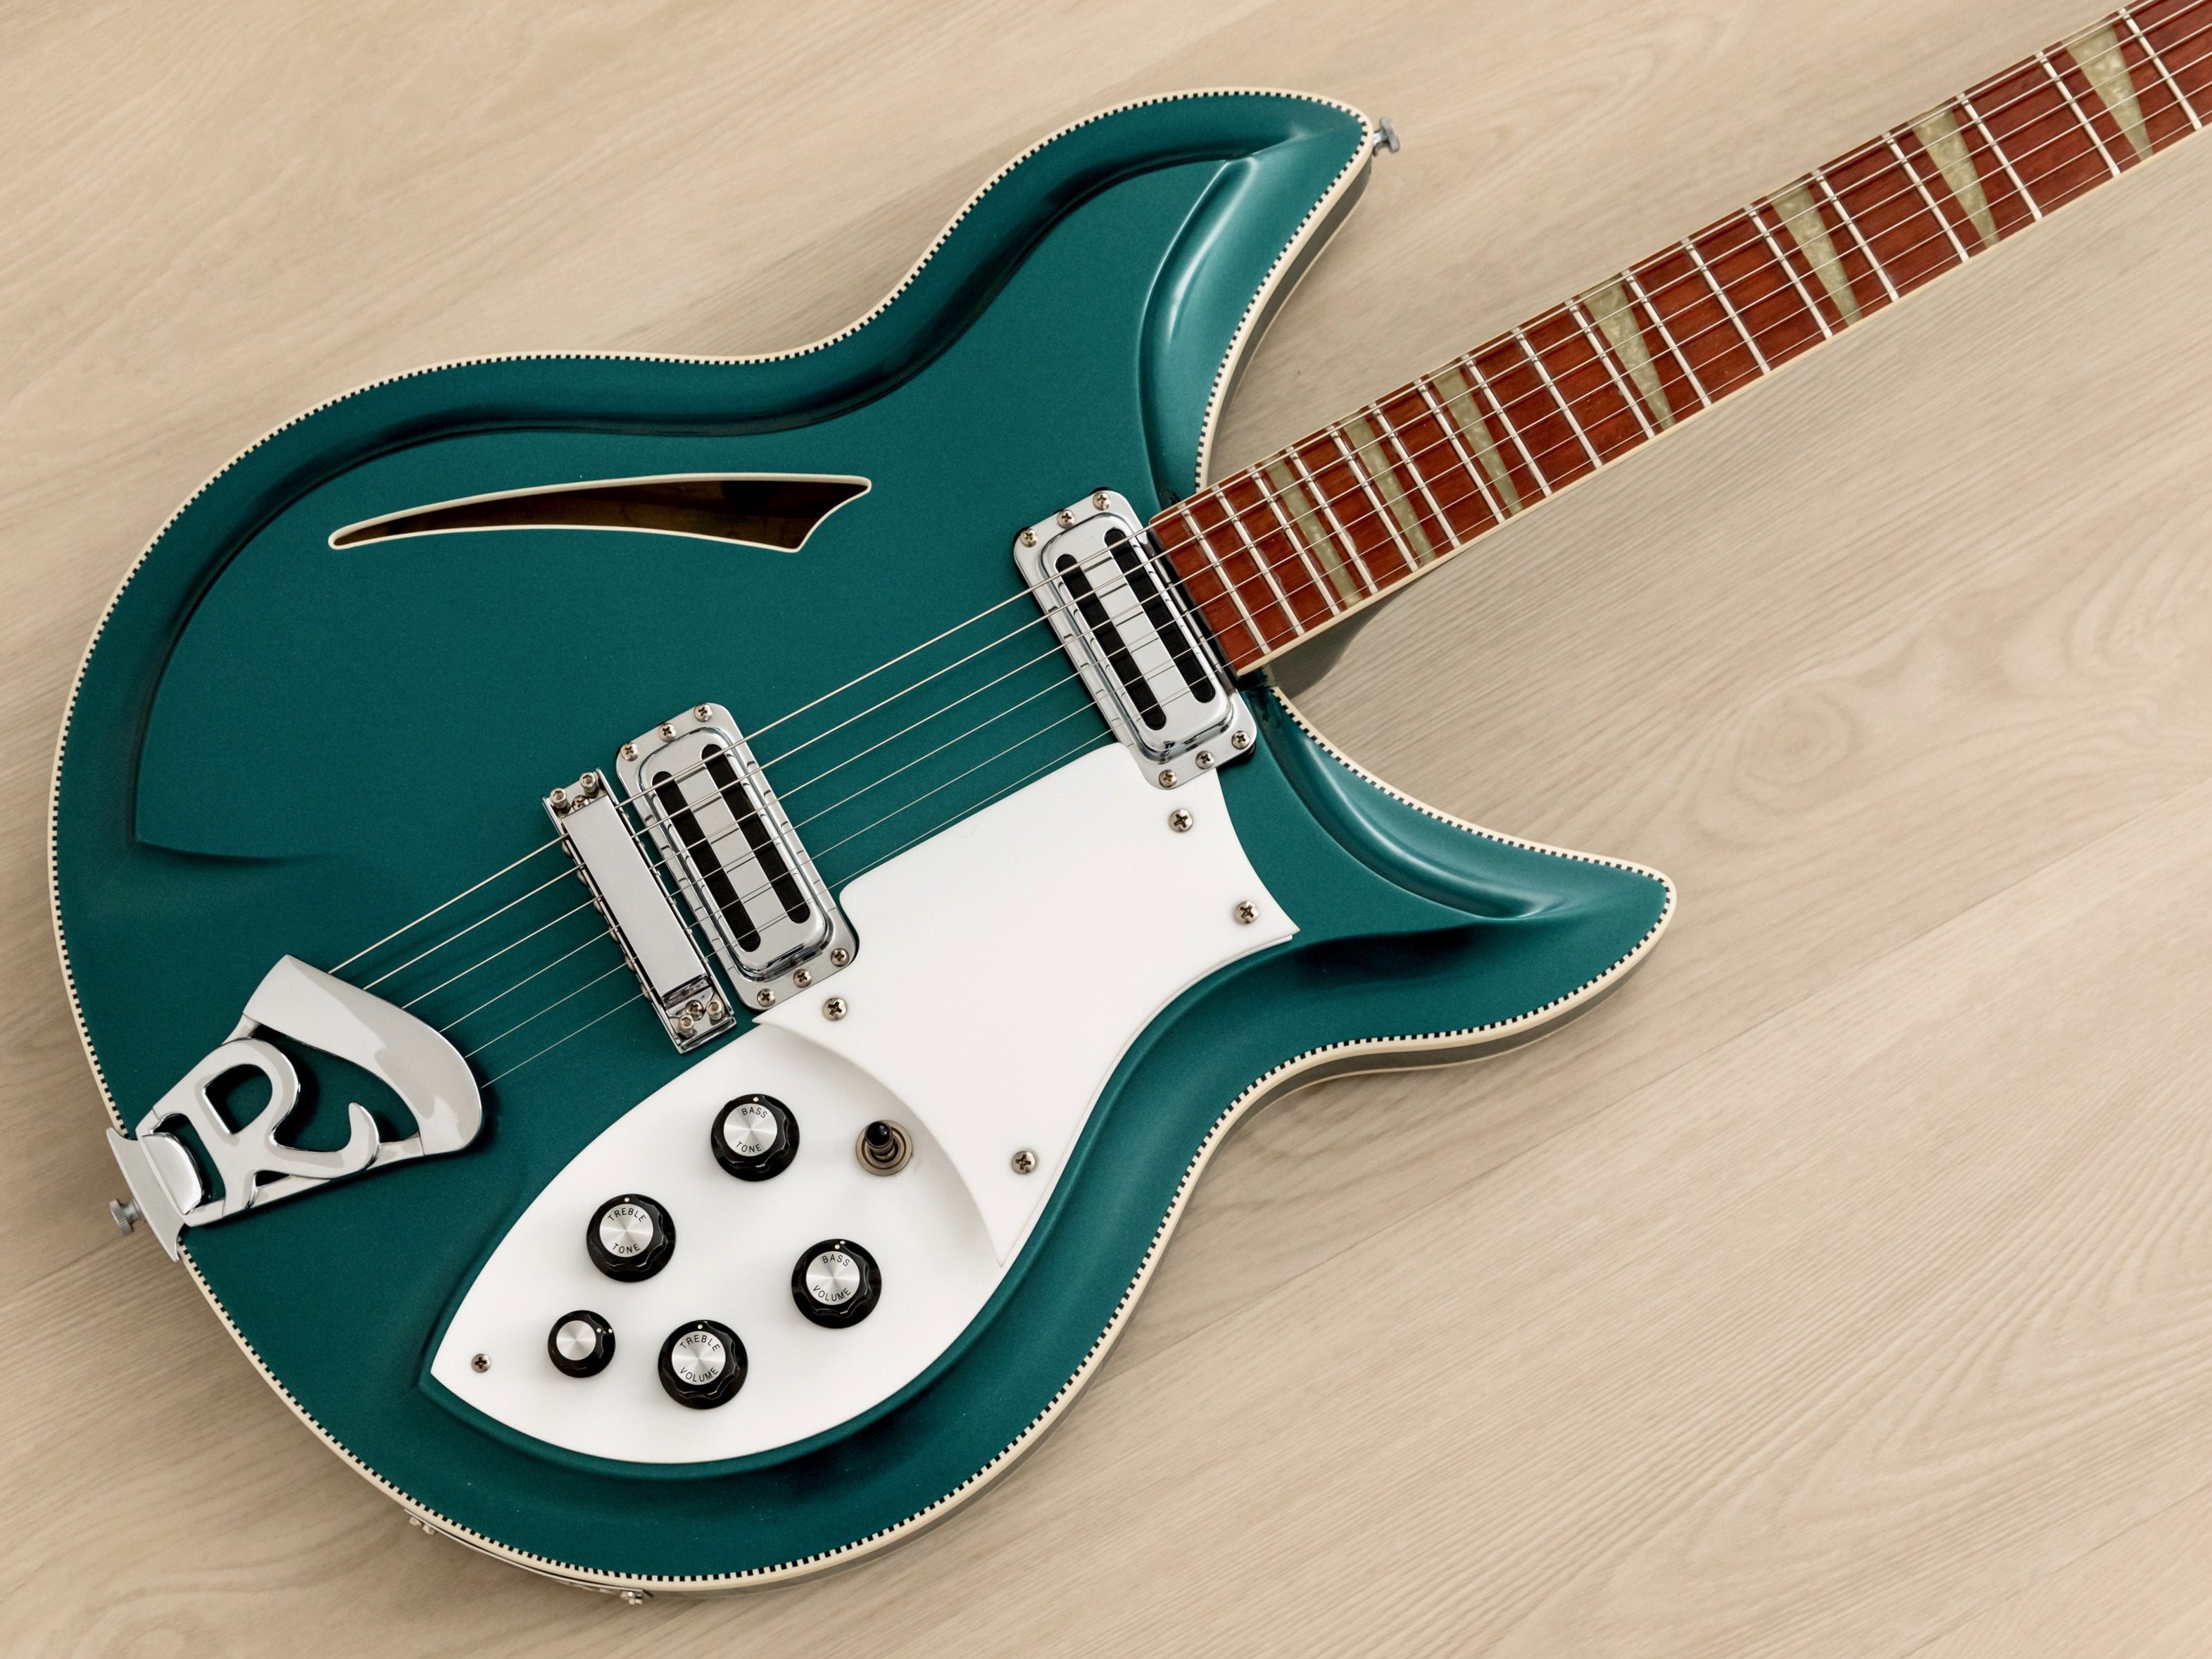 1993 Rickenbacker 381V69 Turquoise Custom Color Electric Guitar w/ Hangtags & Case